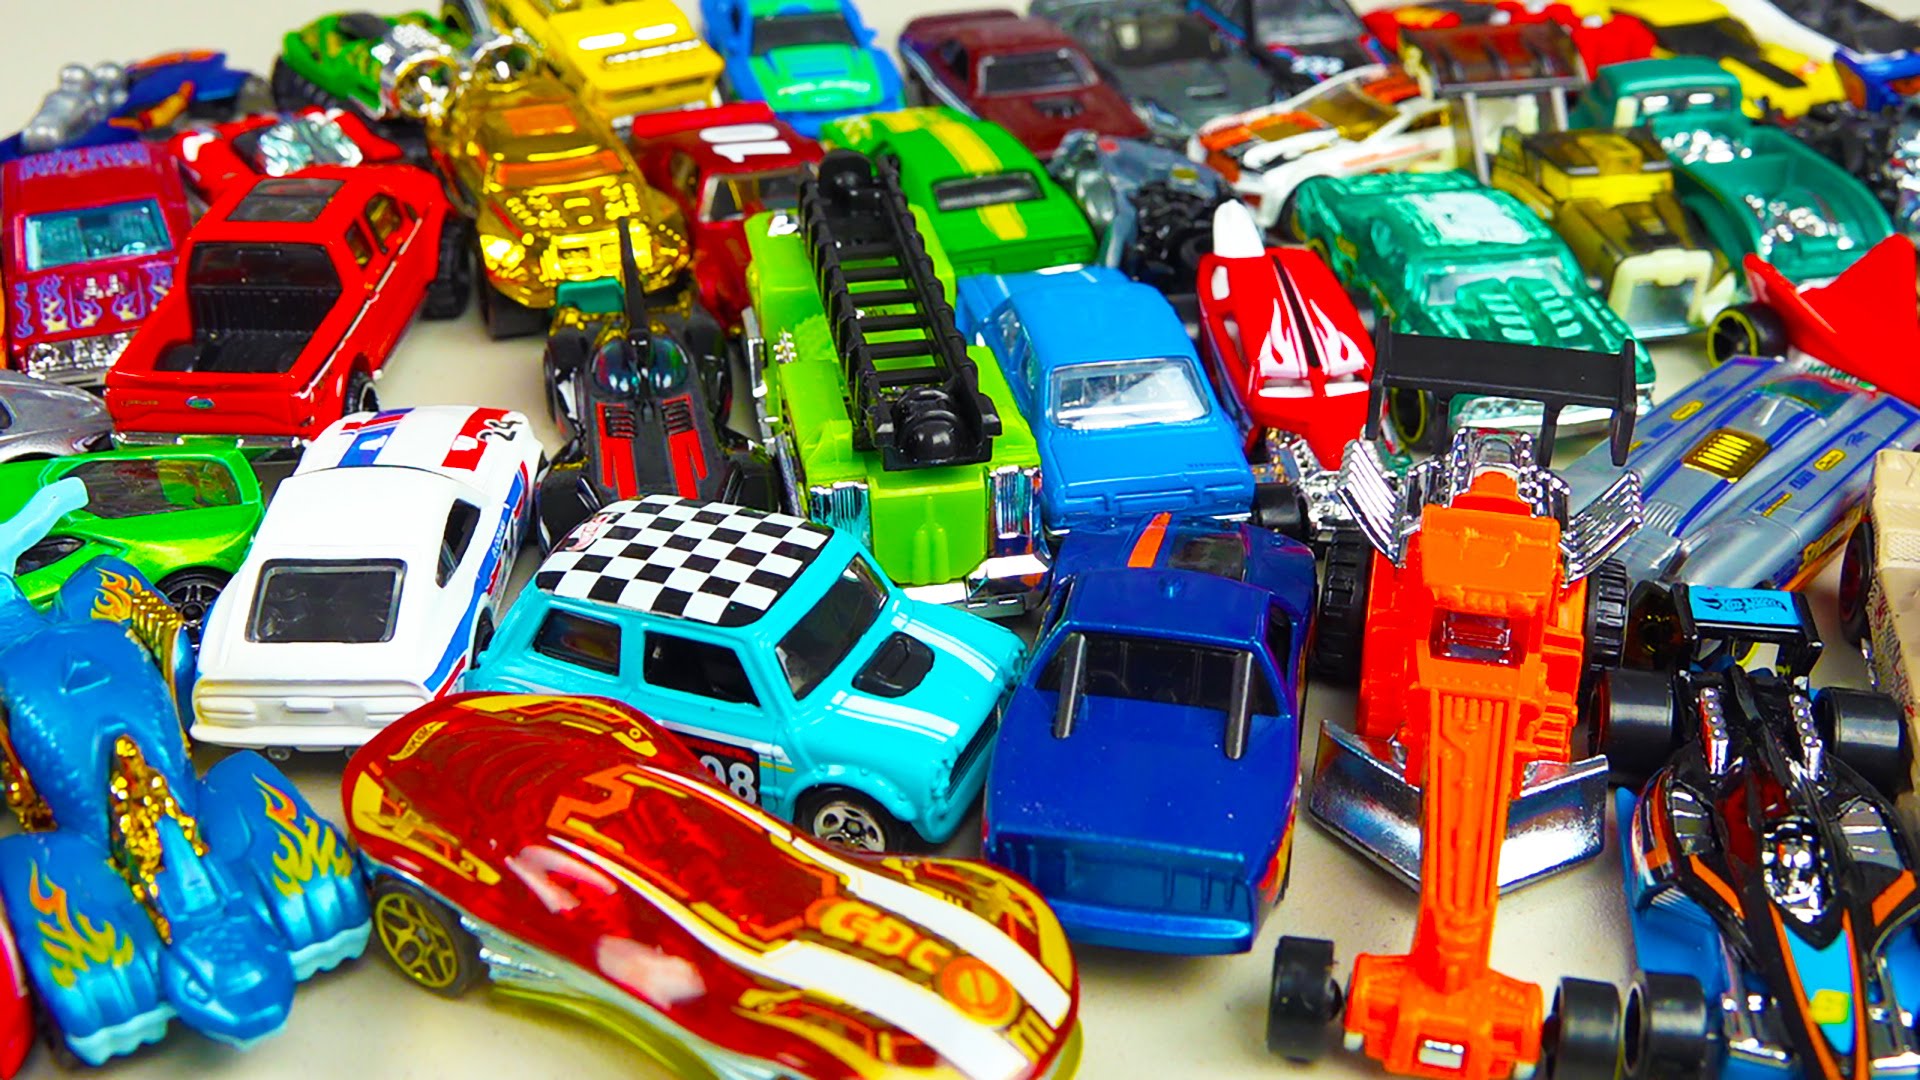 Hot Wheels 50 Pack Toy Cars & Trucks Surprise Box - YouTube